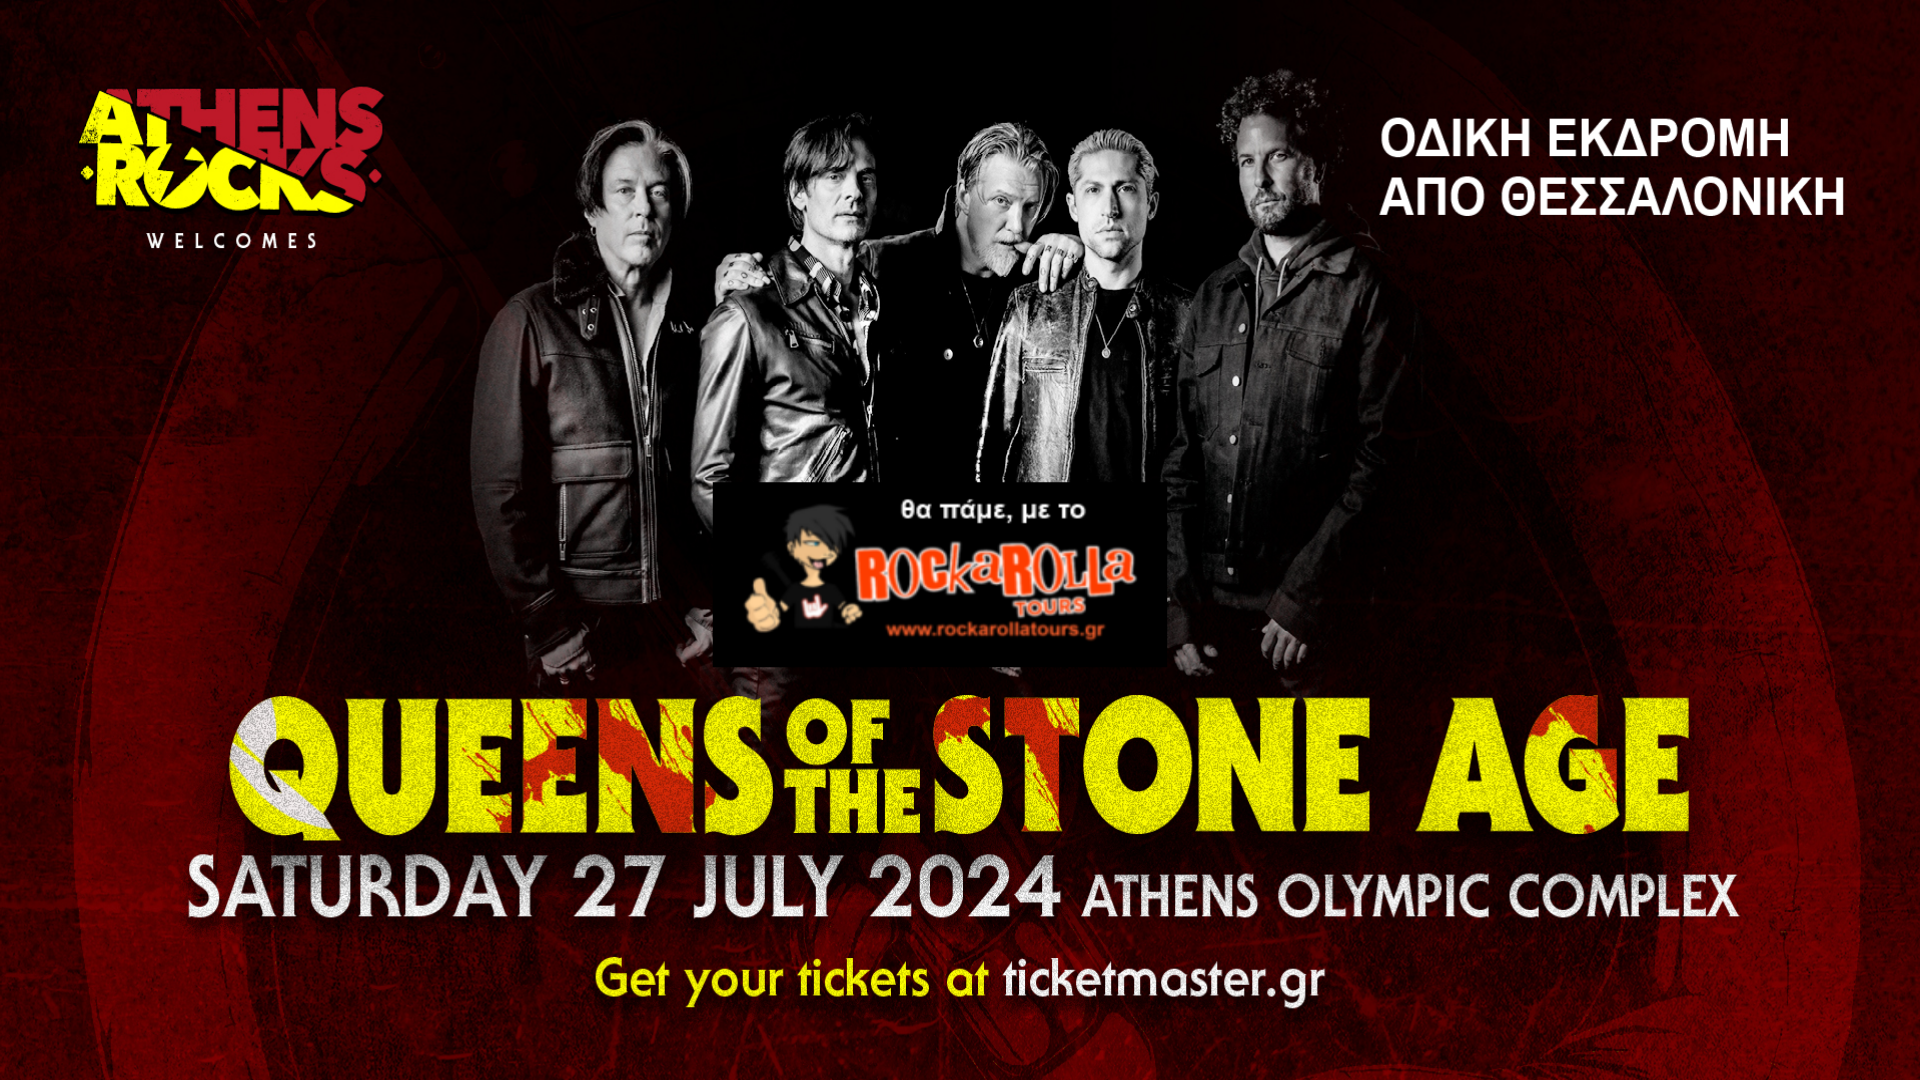 QUEENS OF THE STONE AGE / ΑTHENS / 27.07.2024